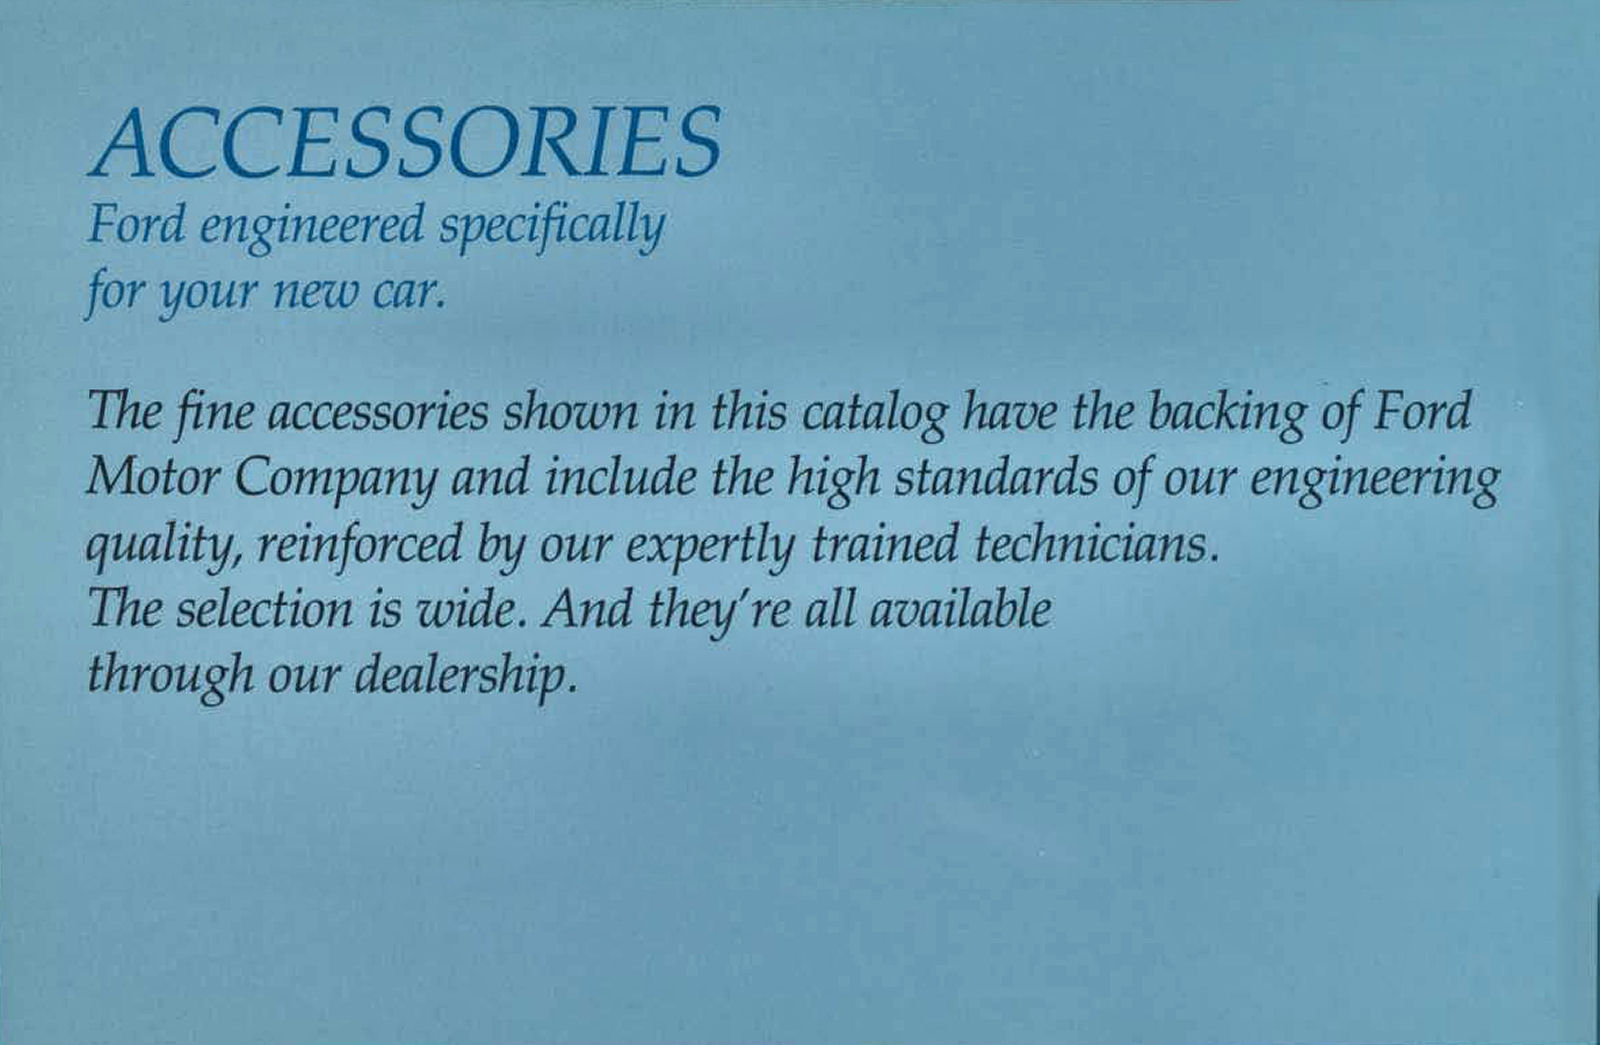 1985 Ford Cars Accessories.pdf-2024-5-26 10.36.55_Page_02